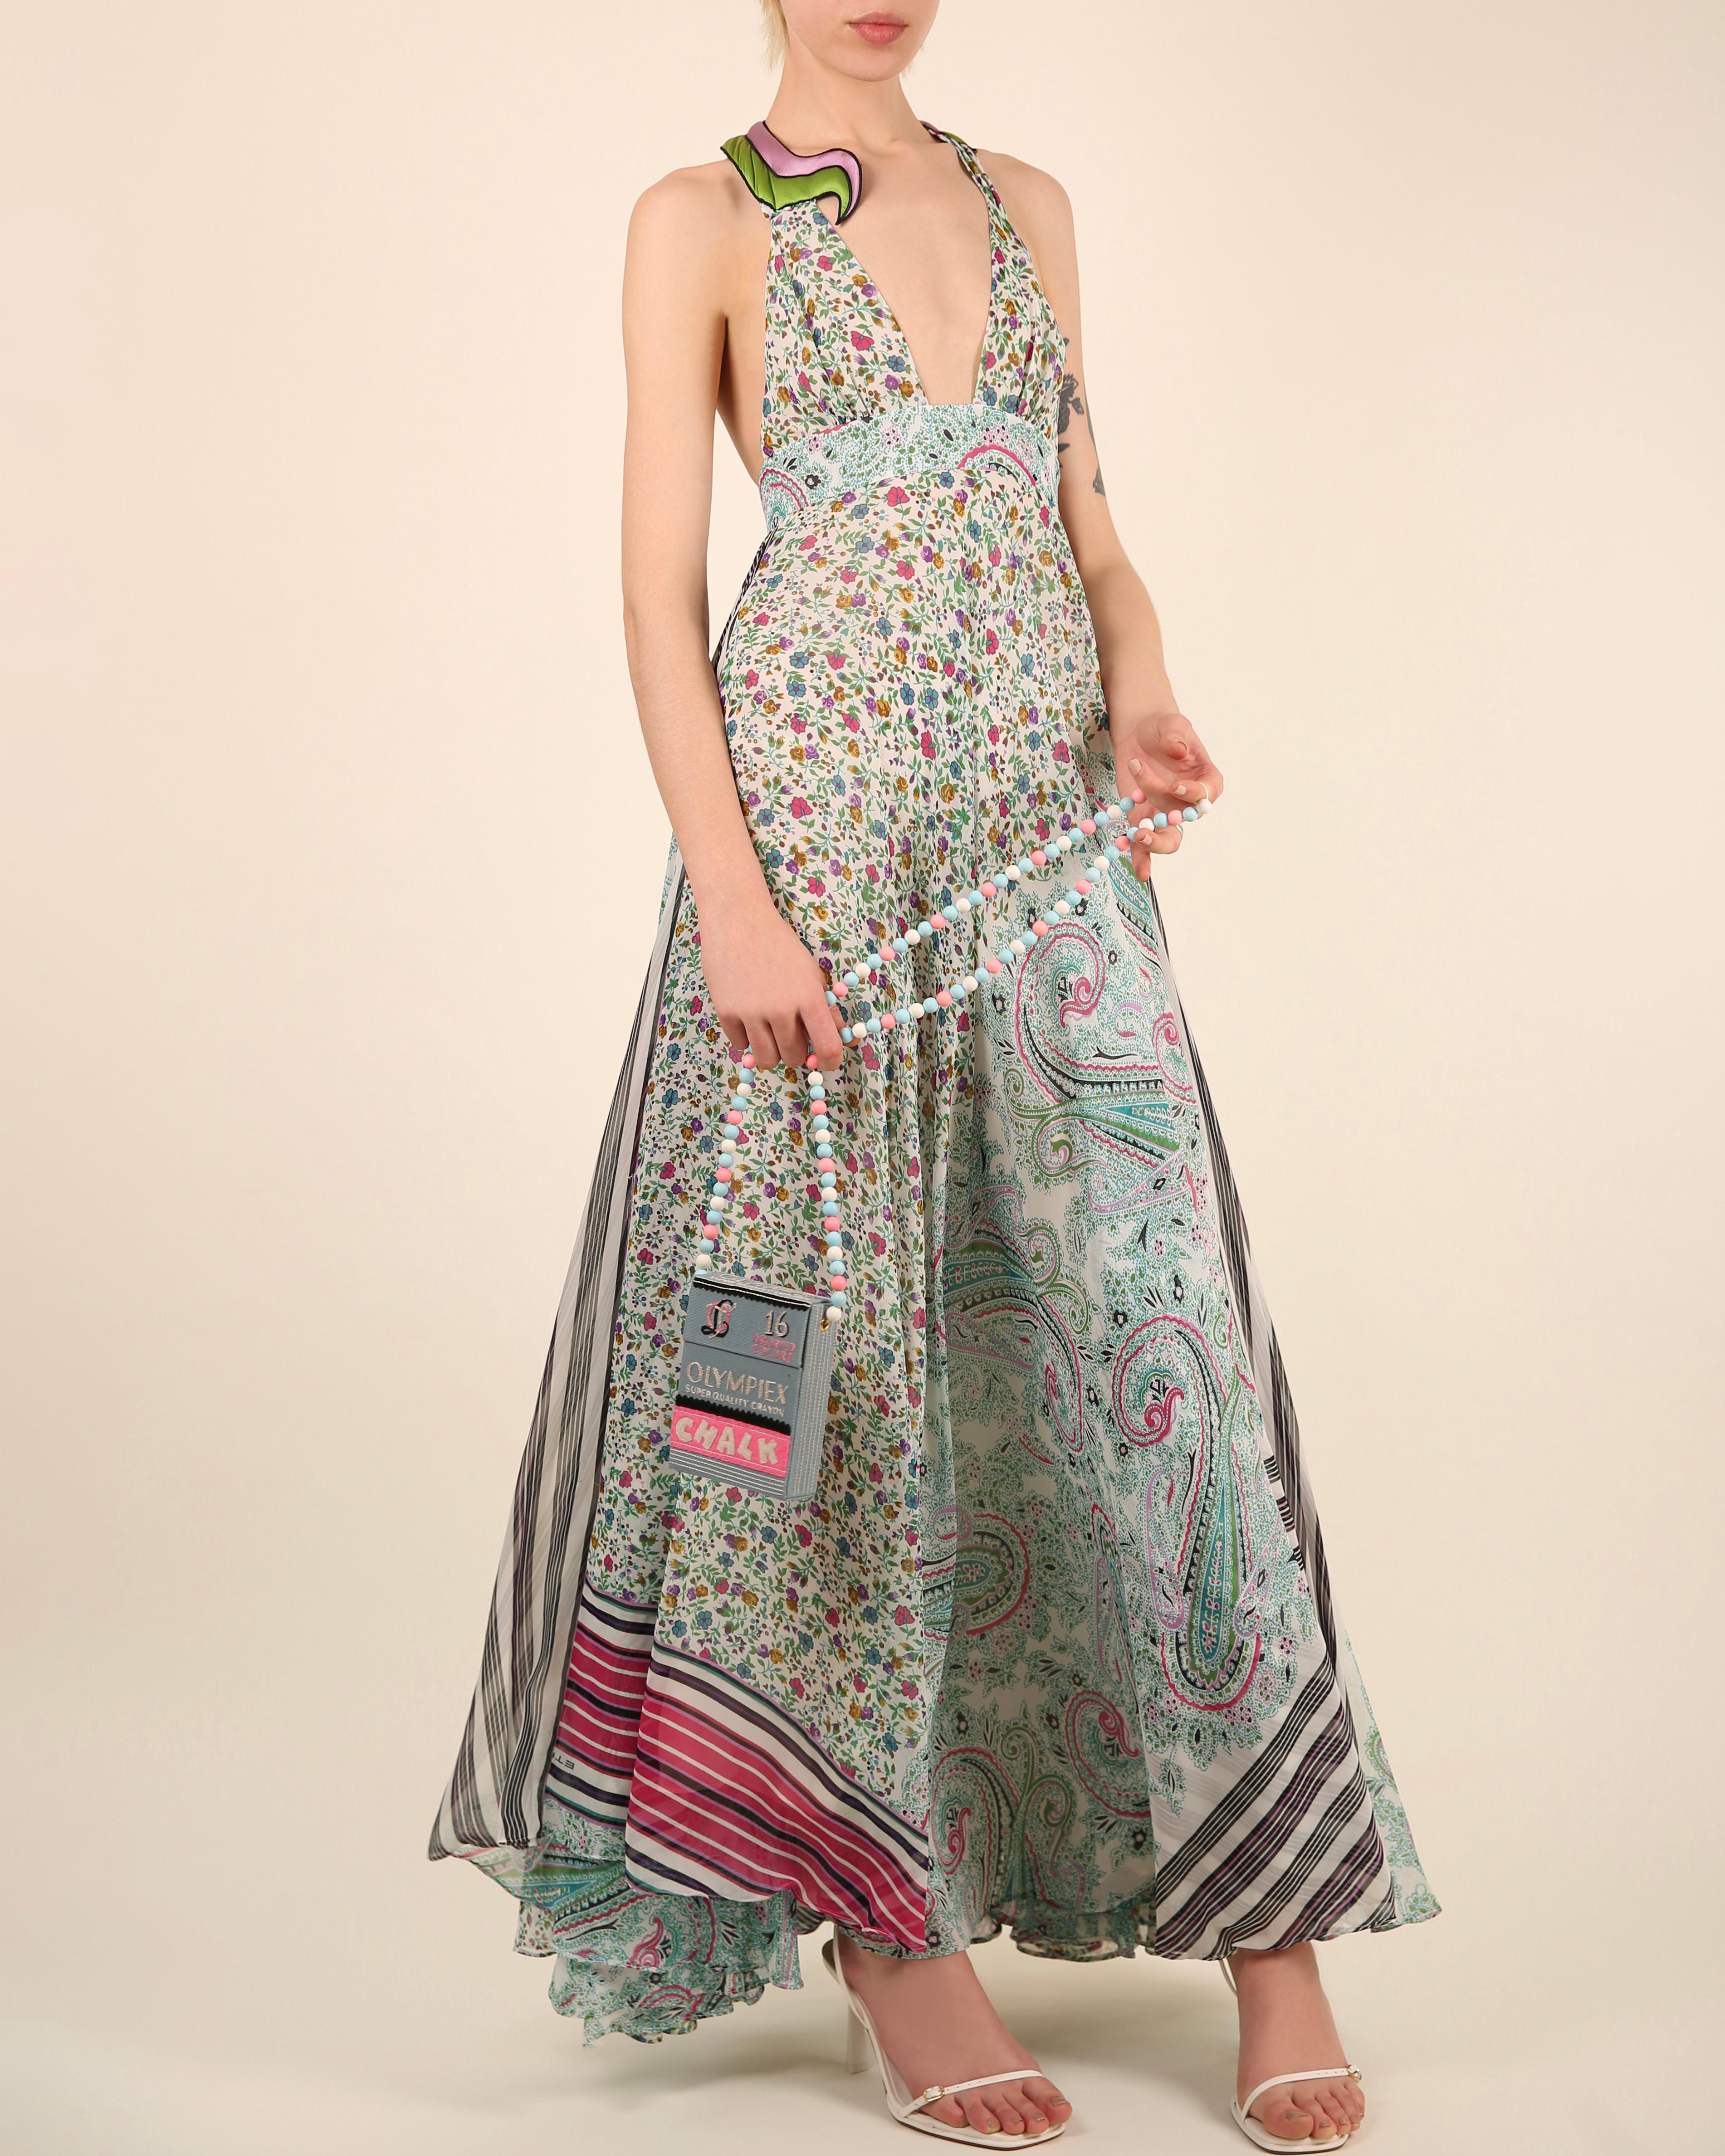 LOVE LALI Vintage

An incredibly feminine floor length dress by Etro from their Spring/Summer 2007 runway collection 
Low cut plunging neckline
Floral, stripe and paisley multicolour print
Padded satin detail to the shoulder and back in an array of